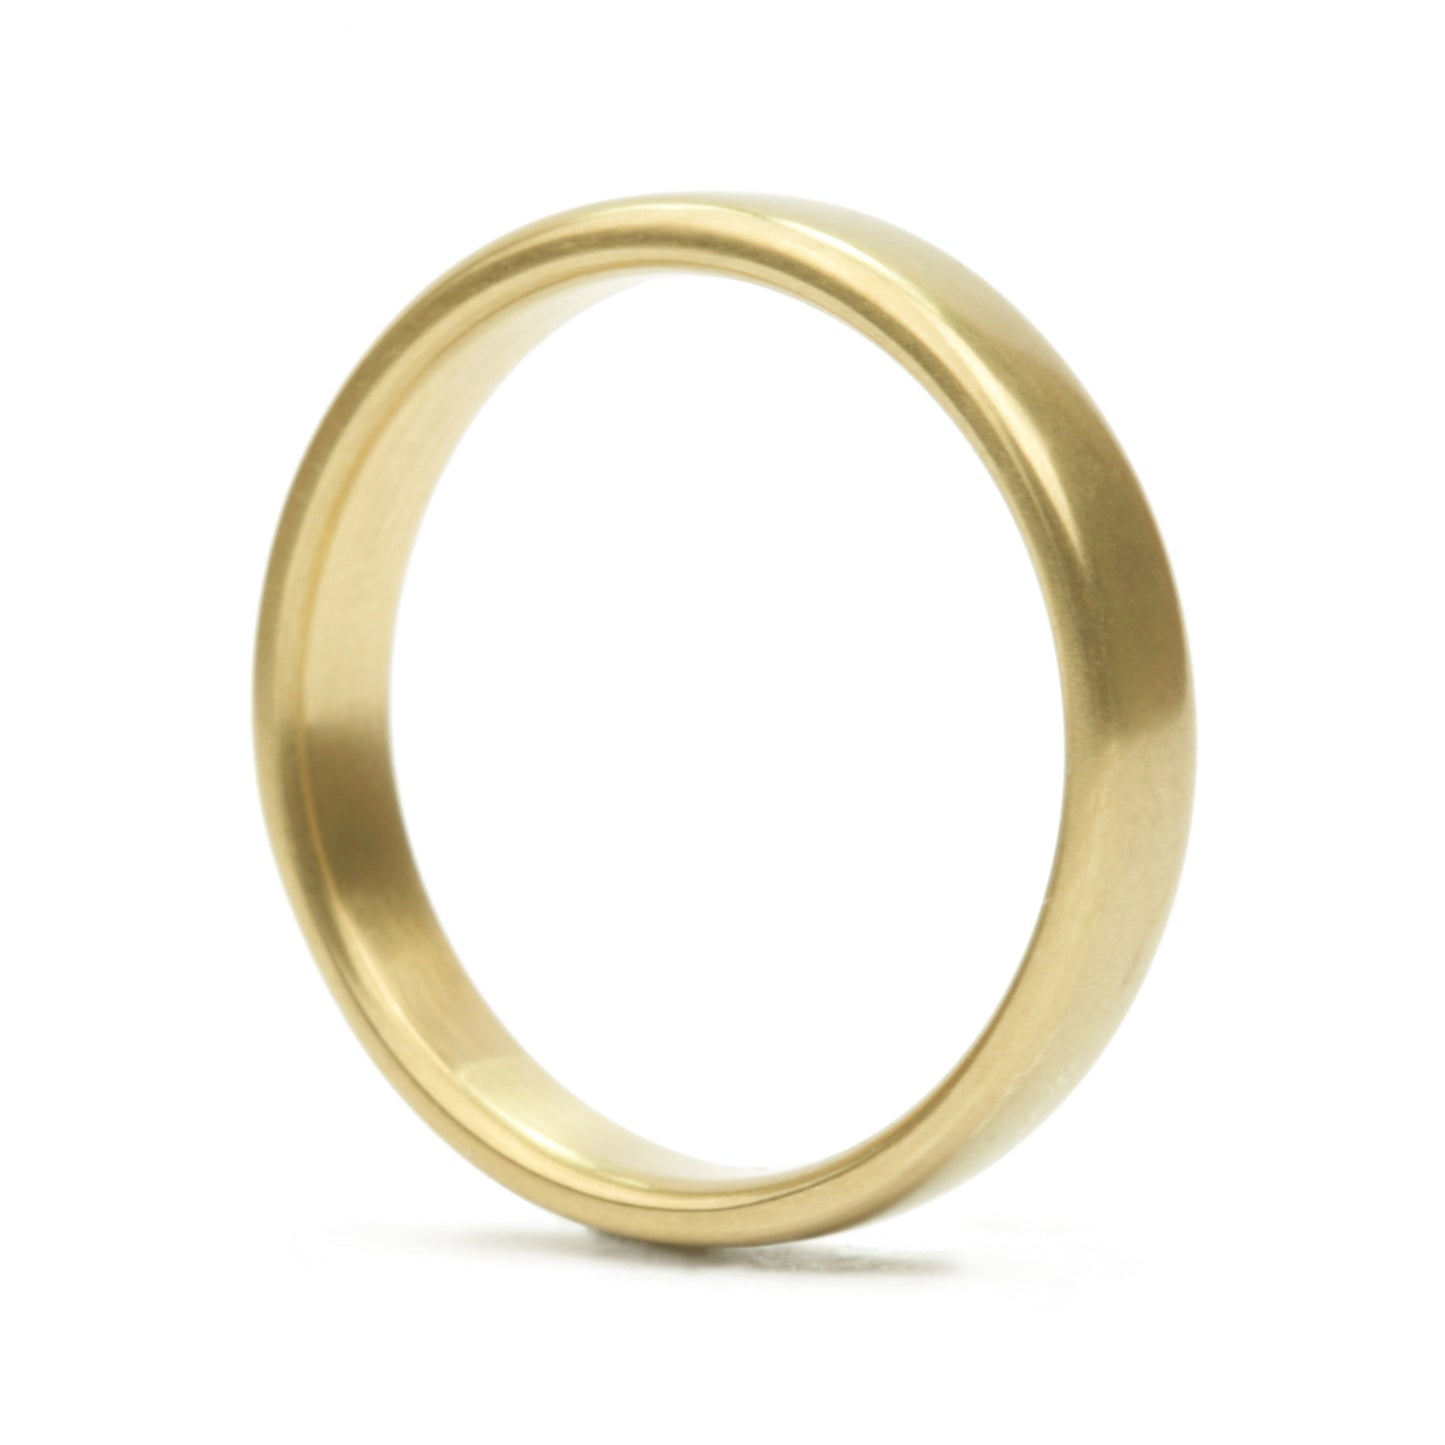 Marian Maurer Rounded Plain Band 3.6 mm side view